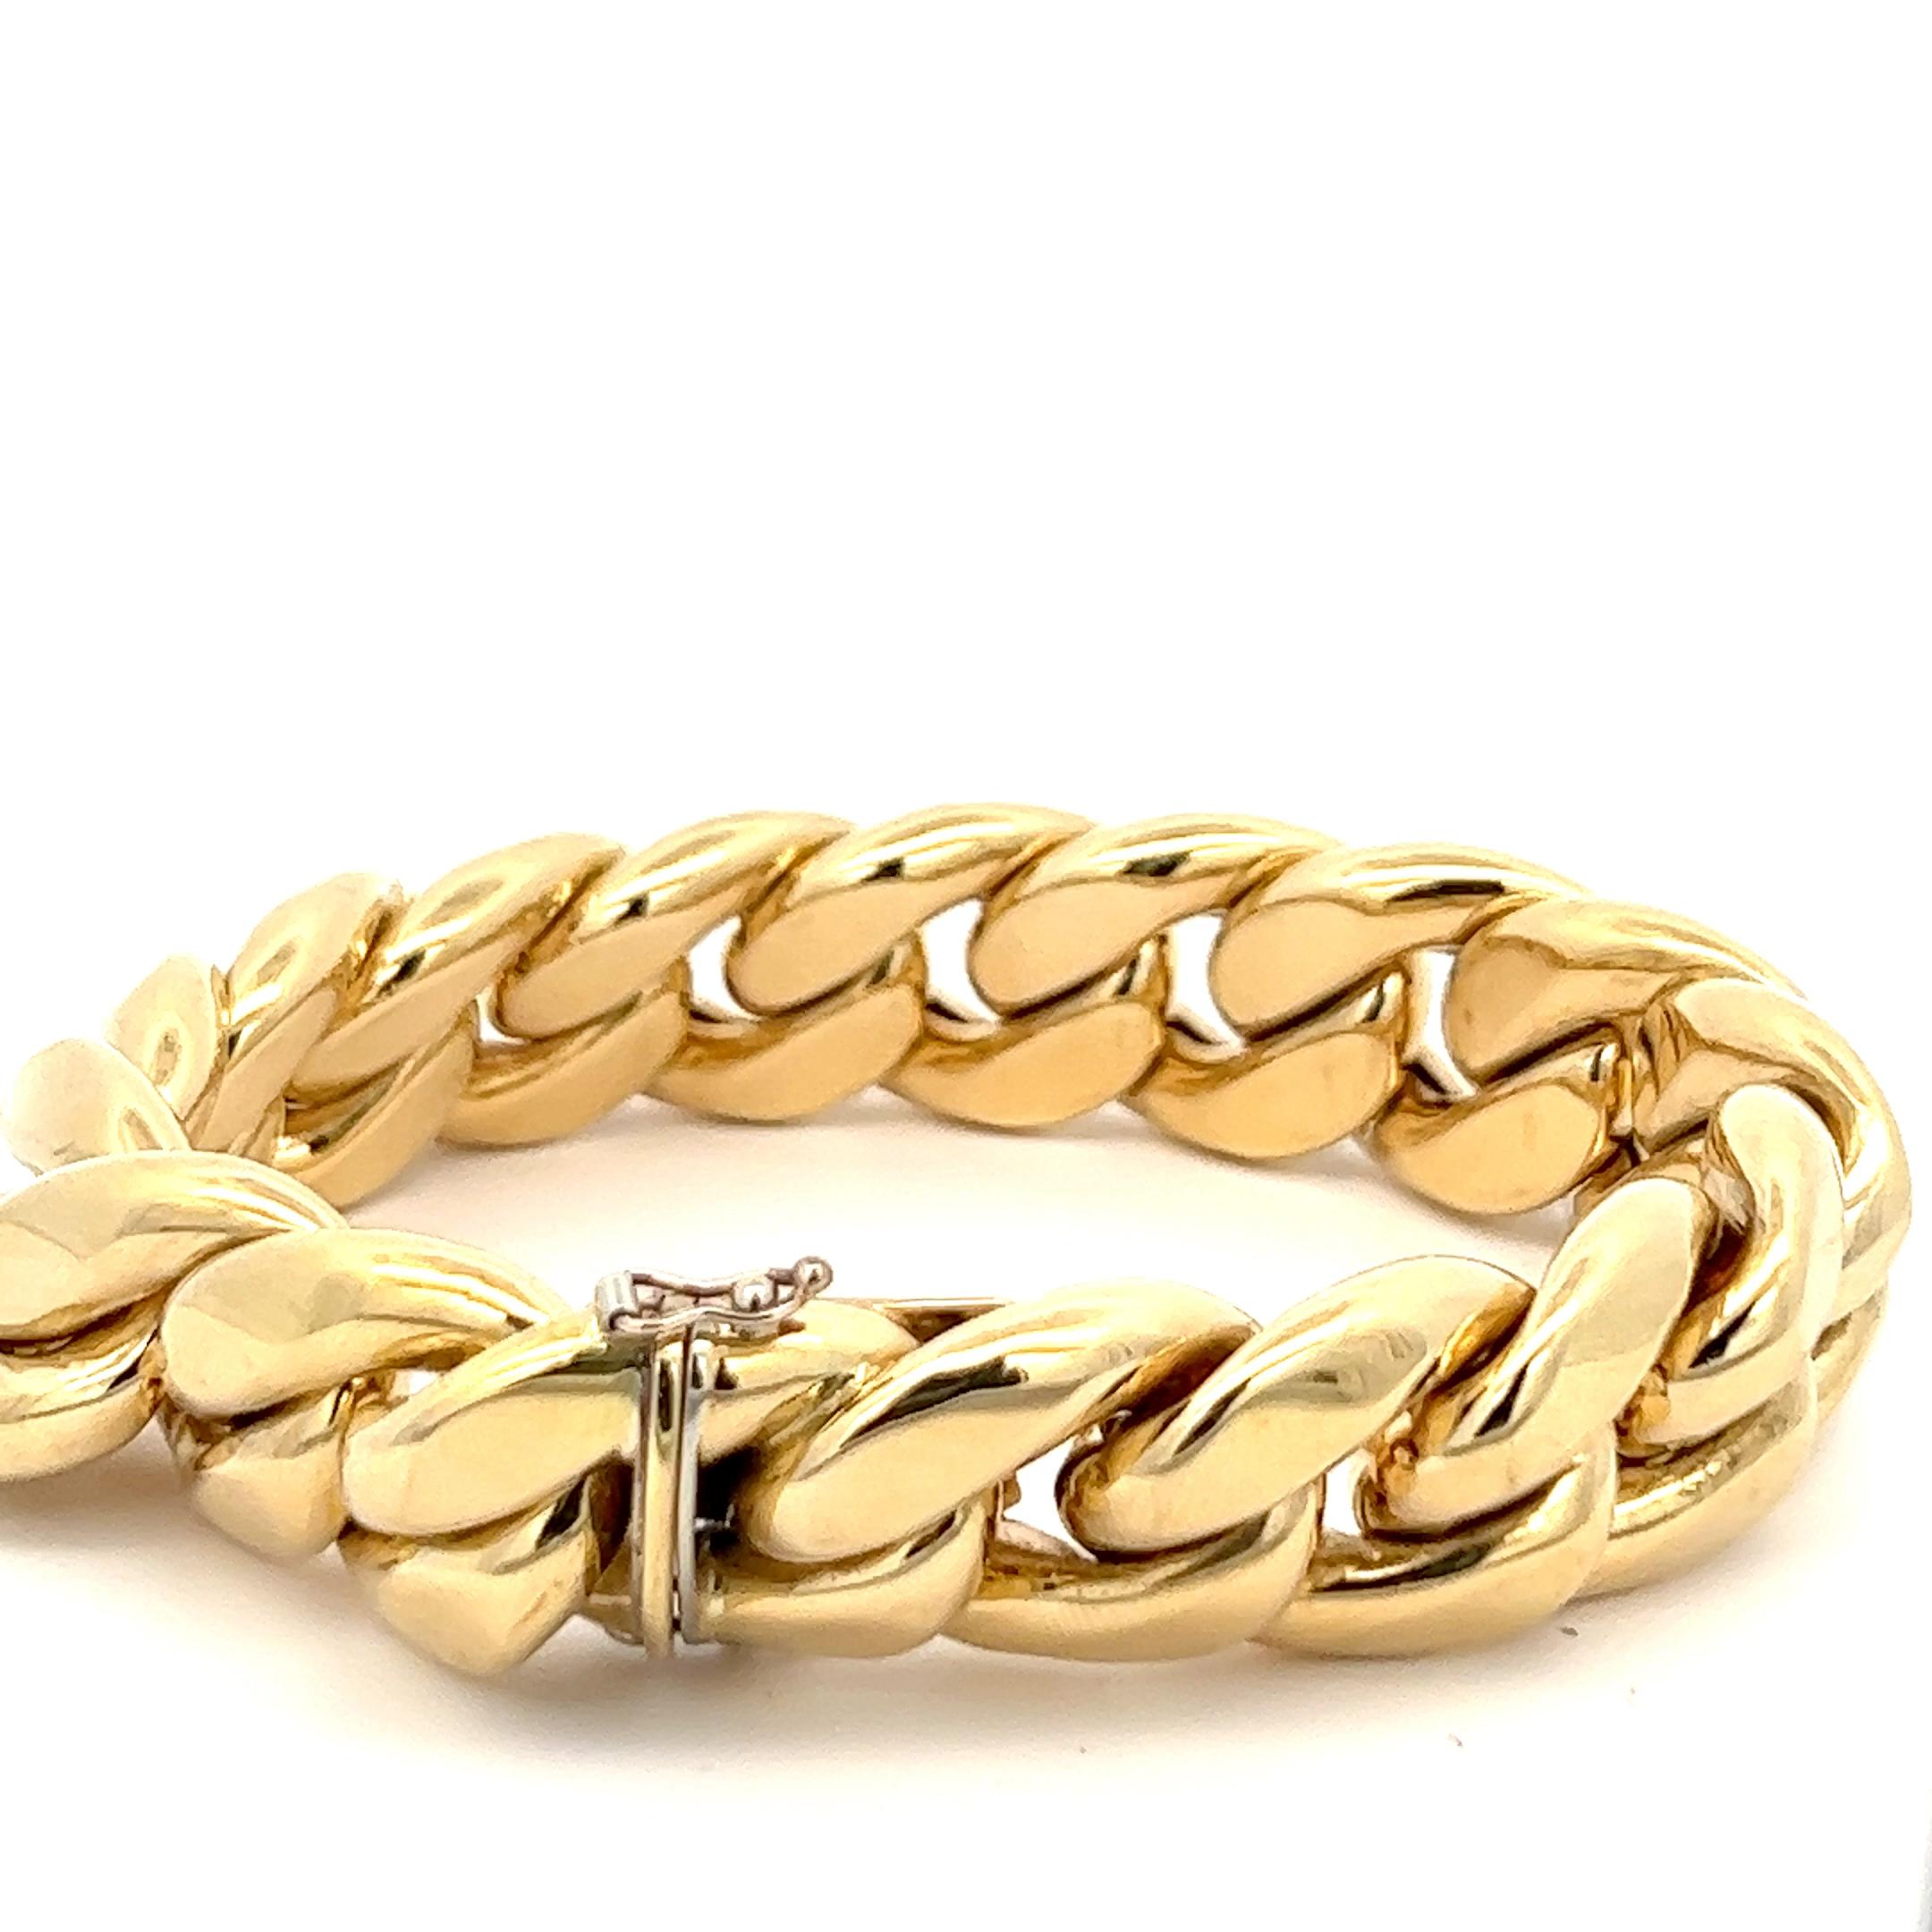 An 18k yellow gold bracelet by Nicolis Cola.

Origin: Vicenza, Italy.
Age: circa 1980.
Measurements: circa 20.4 cm long and circa 1.6cm wide.
Weight: circa 56.6 grams.
Marked with the Italian hallmark for 18k gold and the Italian makers mark for